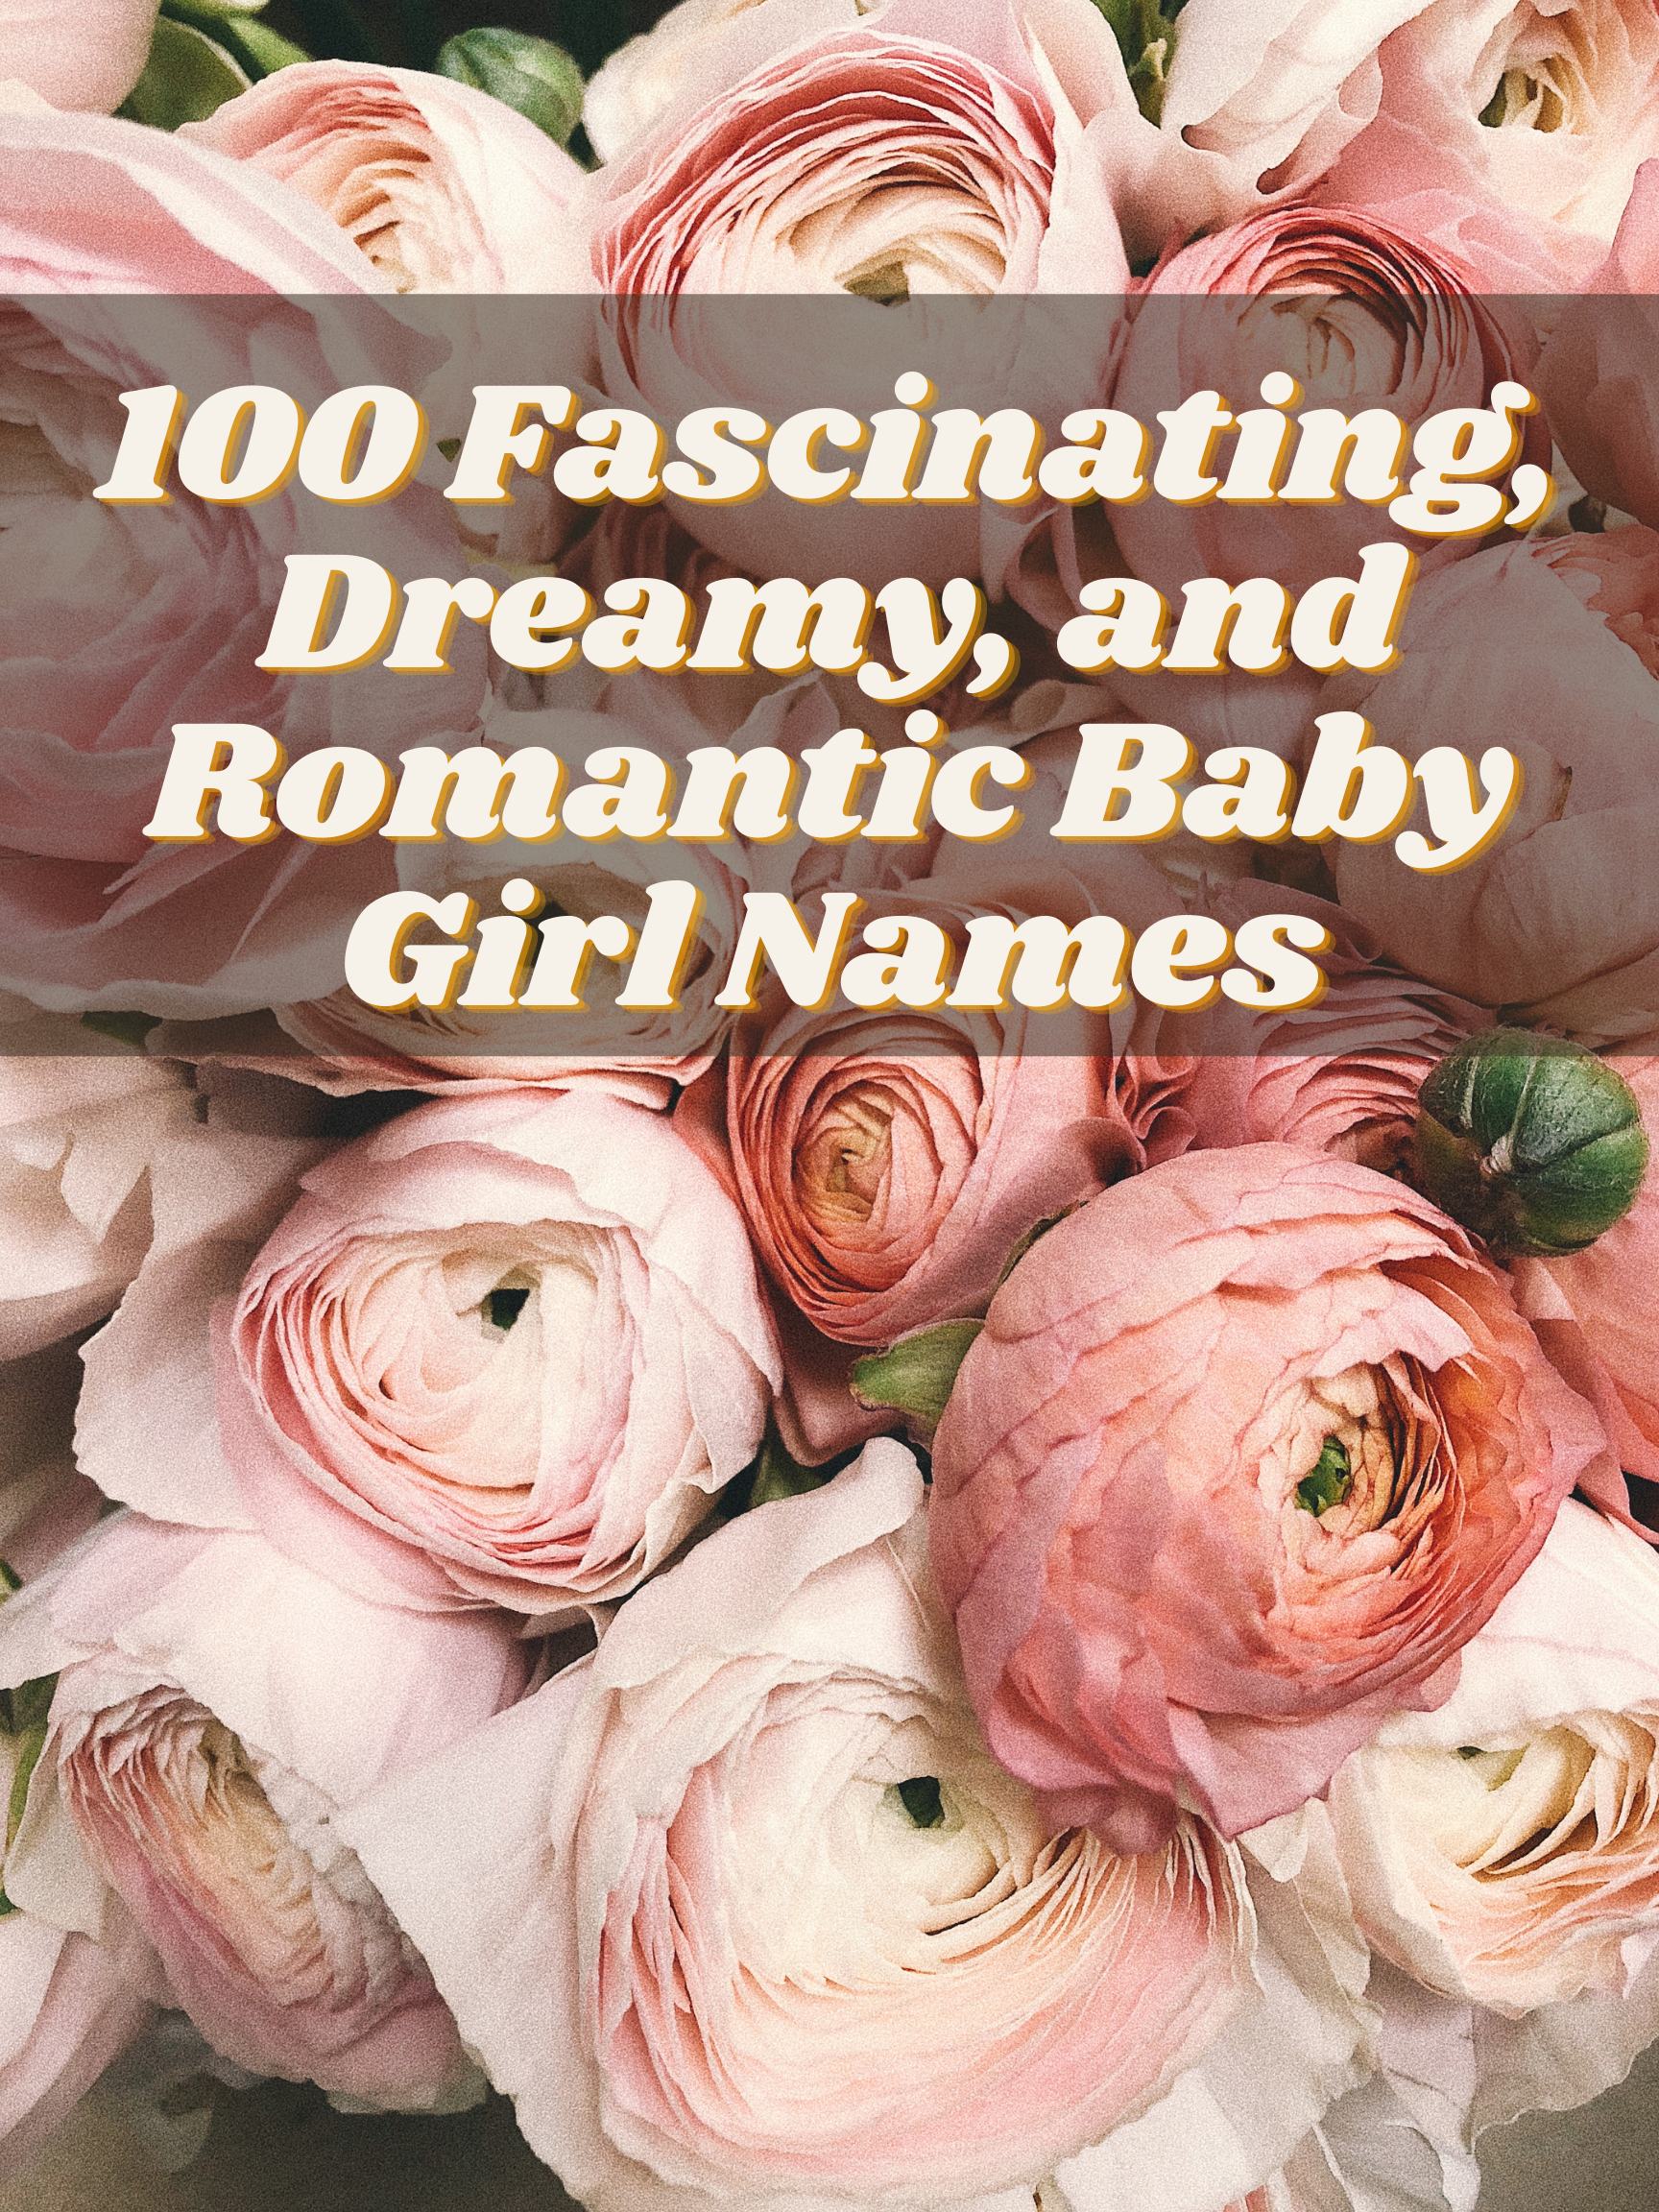 100 Fascinating, Dreamy, and Romantic Baby Girl Names